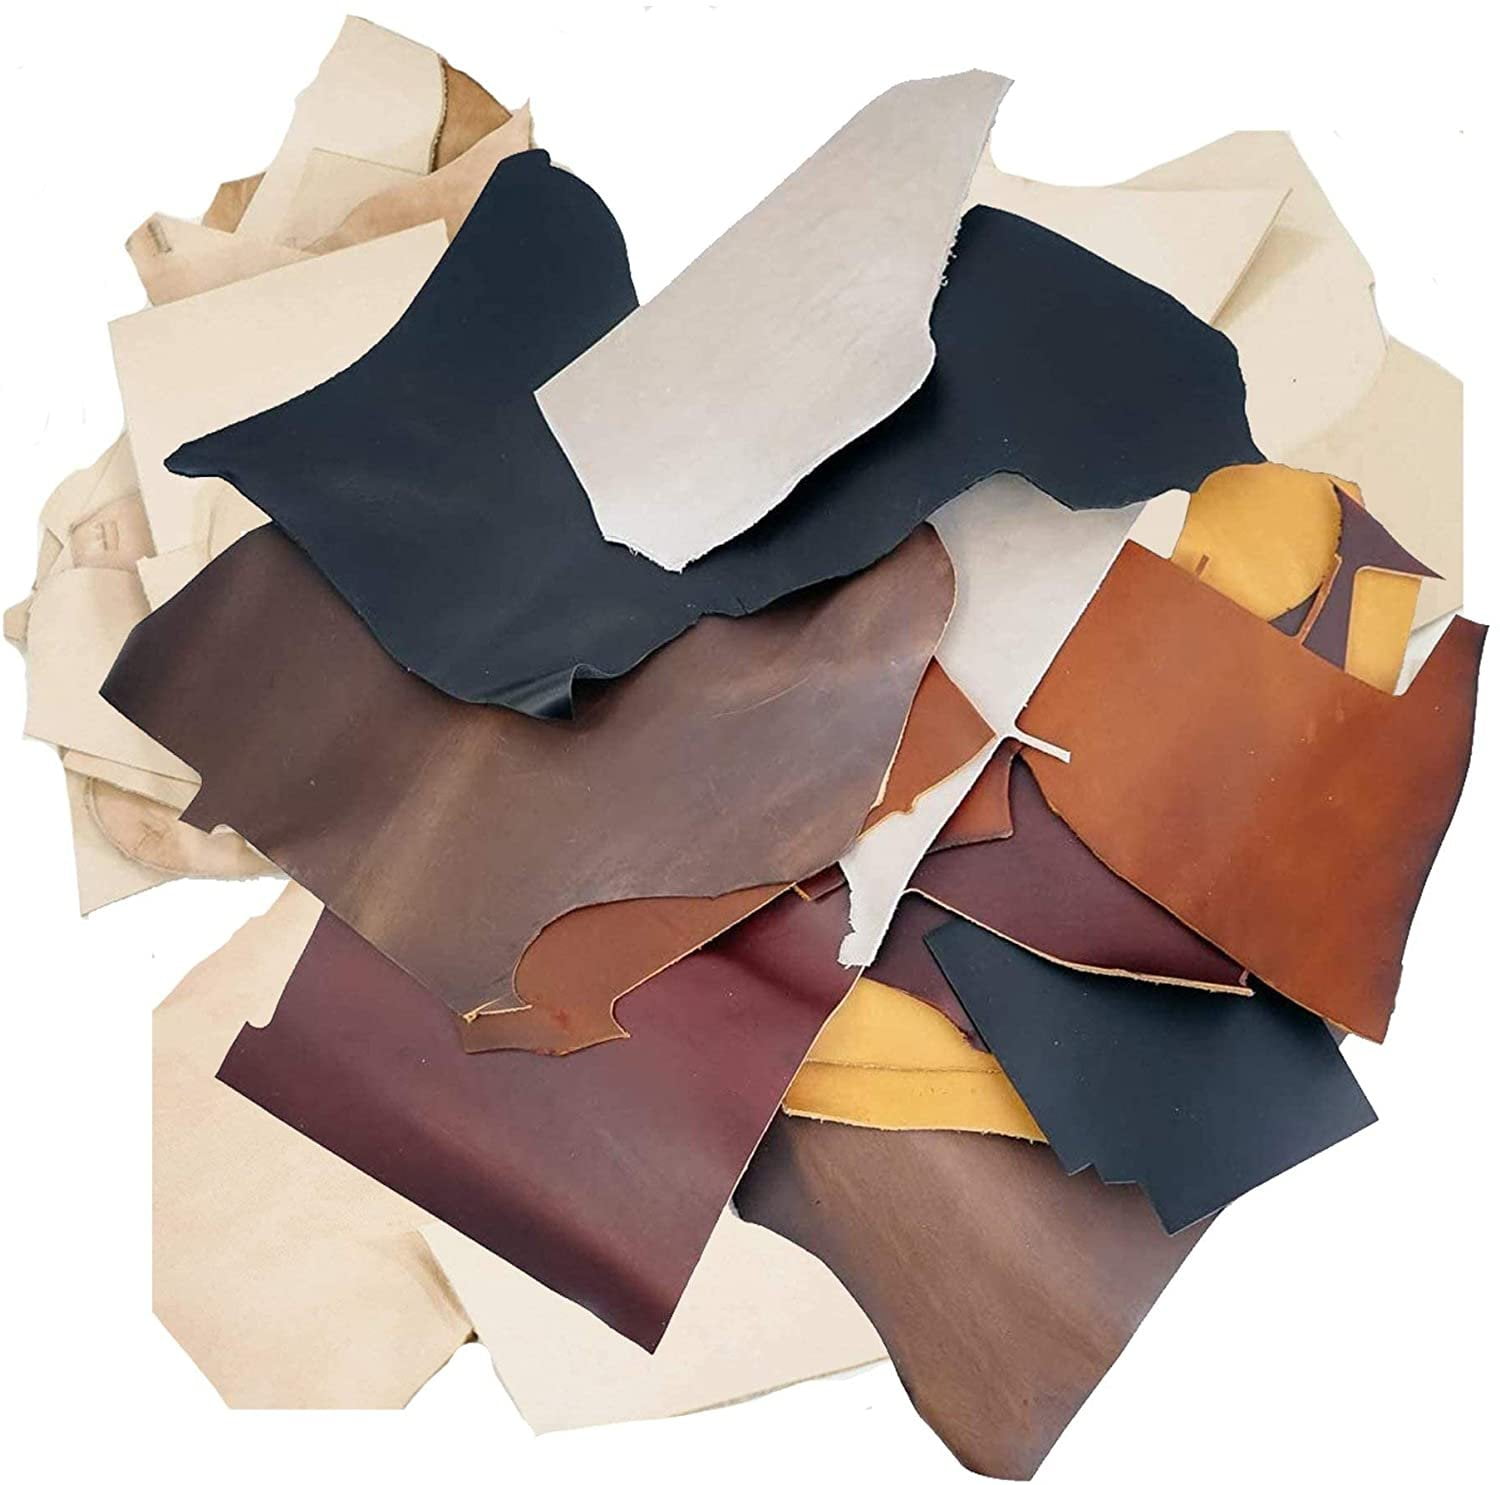 Vegetable Tanned Leather LARGE size 1lb Leather Scraps Tooling Remnants 